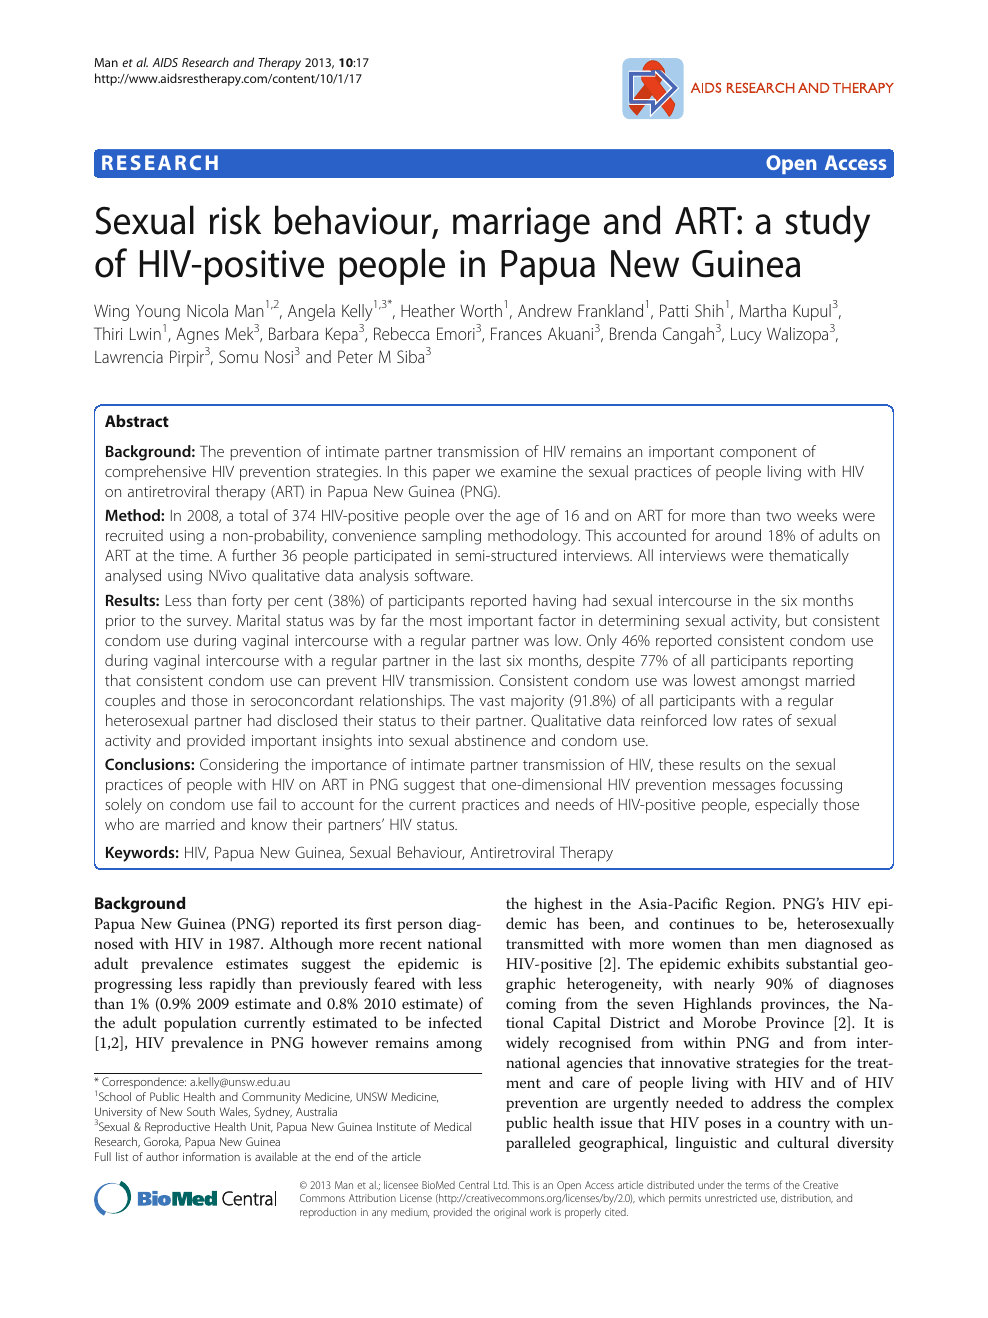 Sexual risk behaviour, marriage and ART a study of HIV-positive people in Papua New Guinea